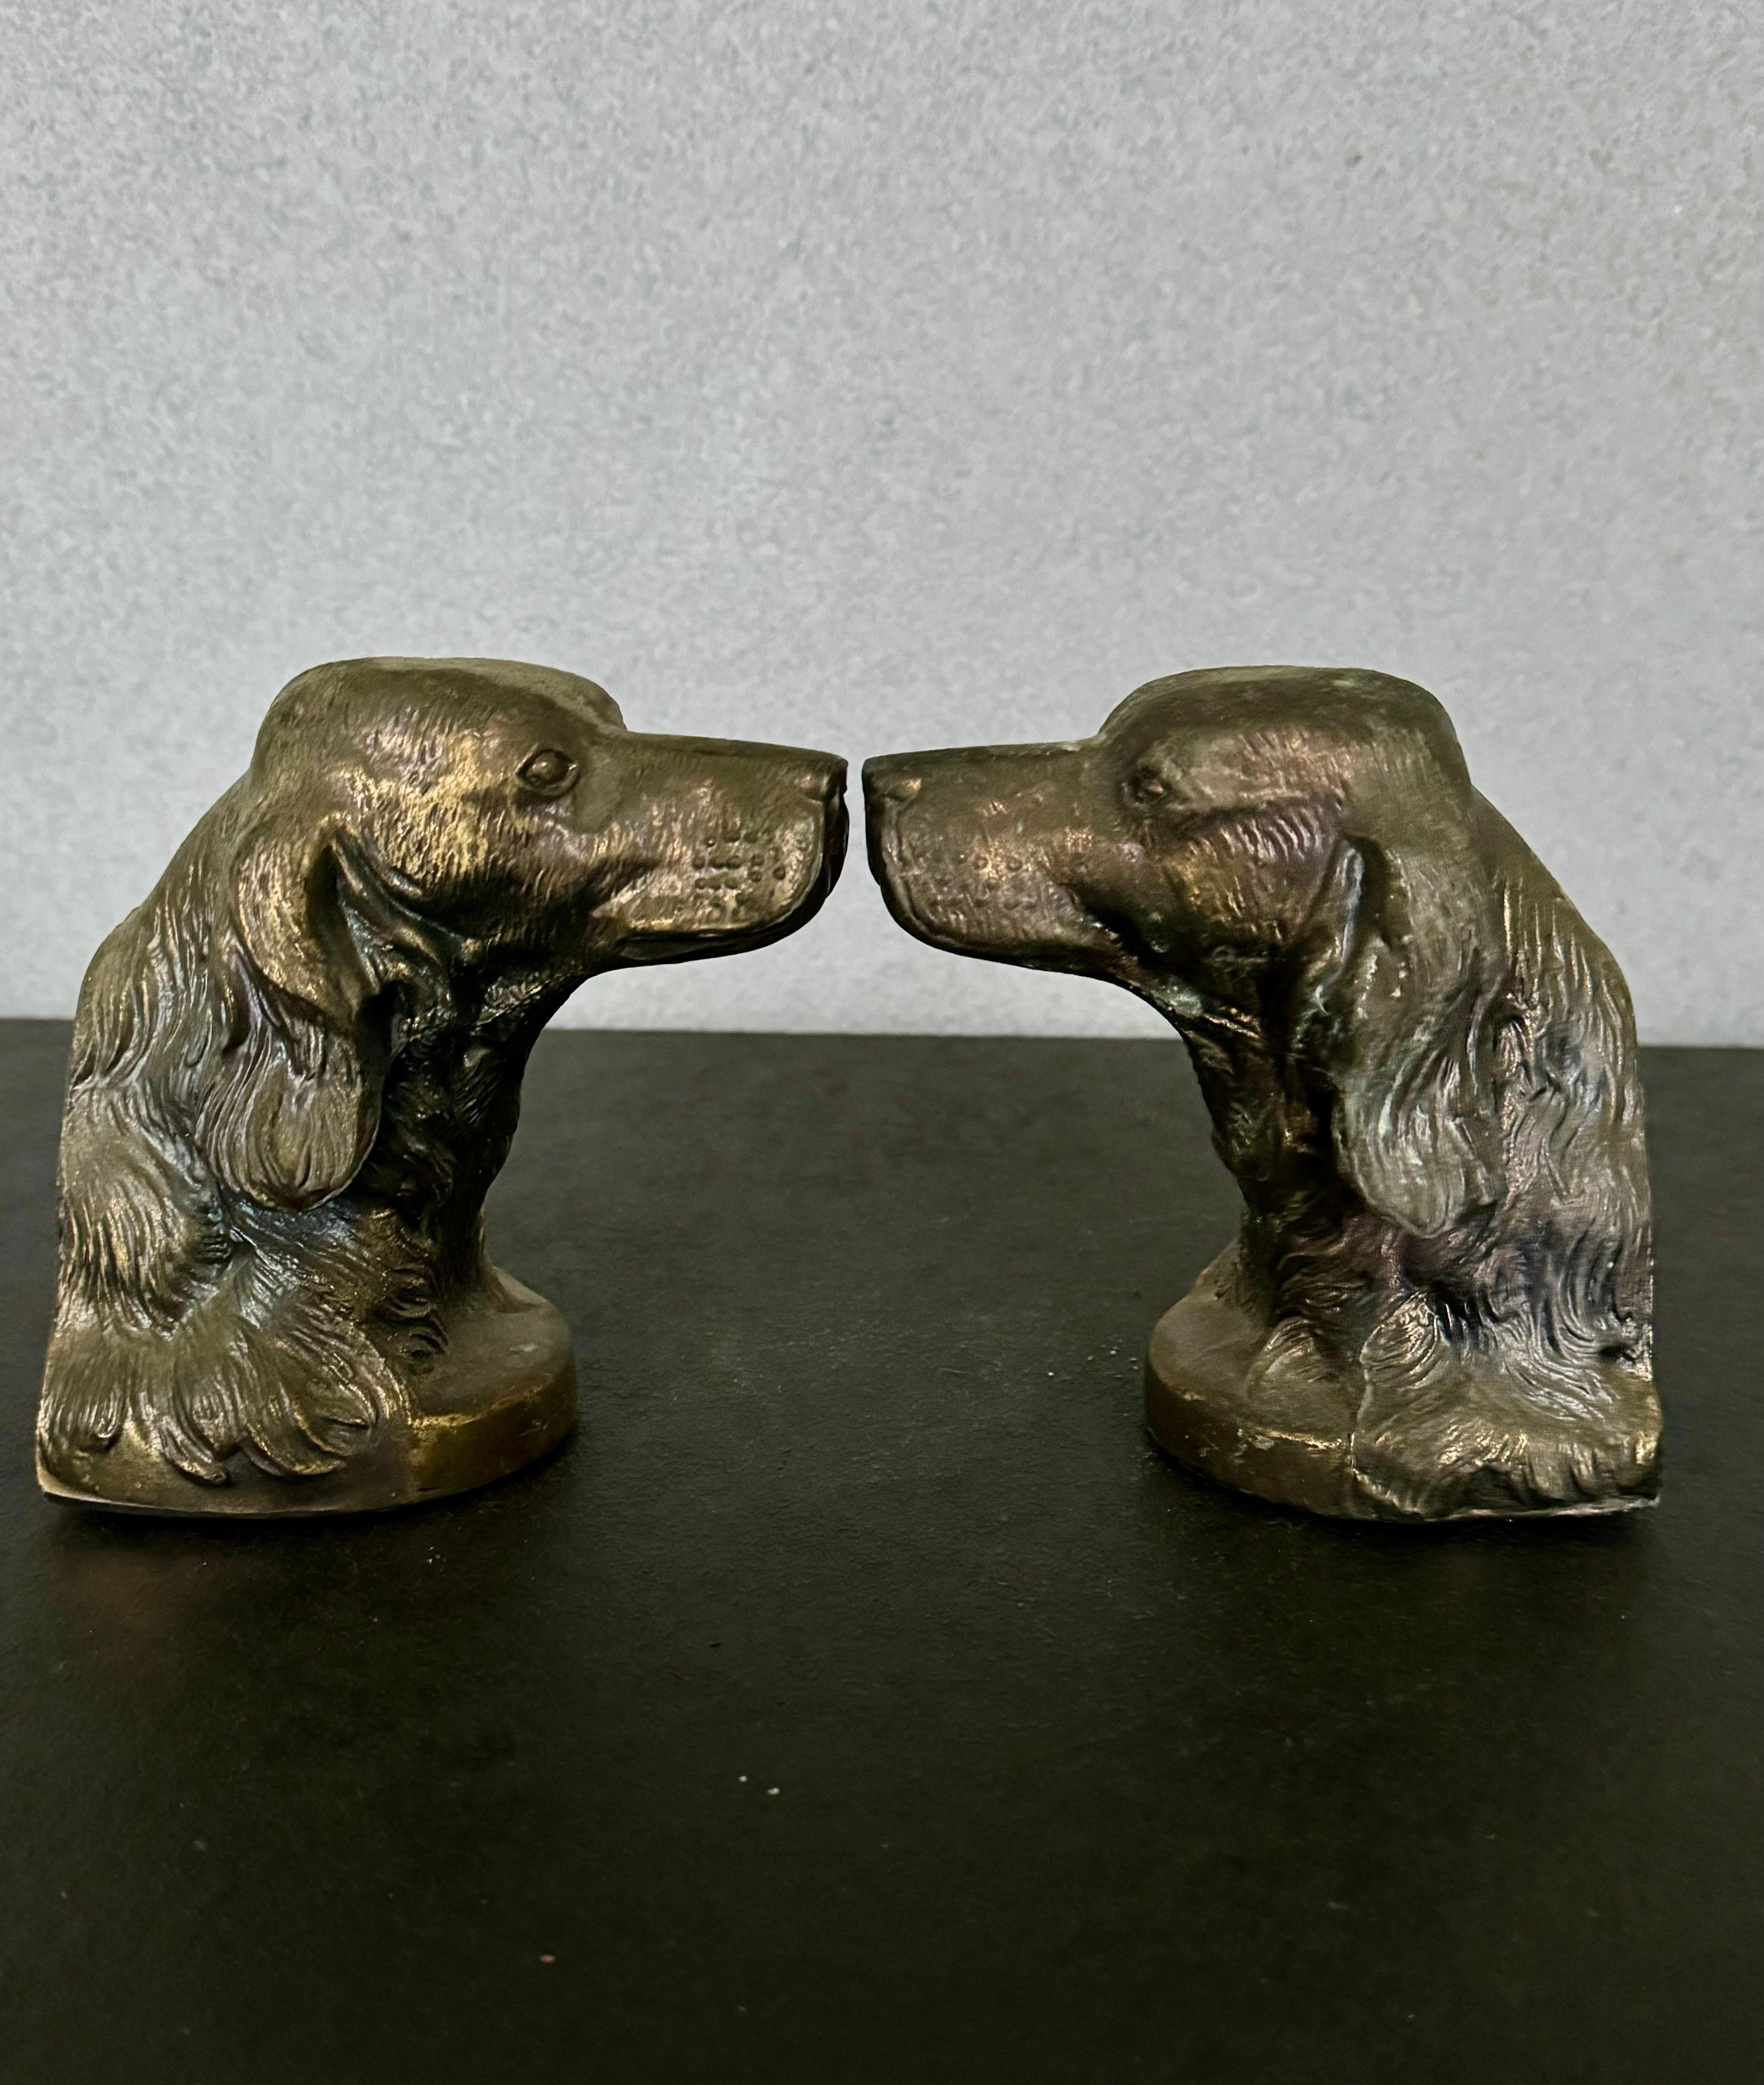 A pair of original bronze plated Irish Setter bookends.
Perfect for styling a bookcase or decorating an office 
